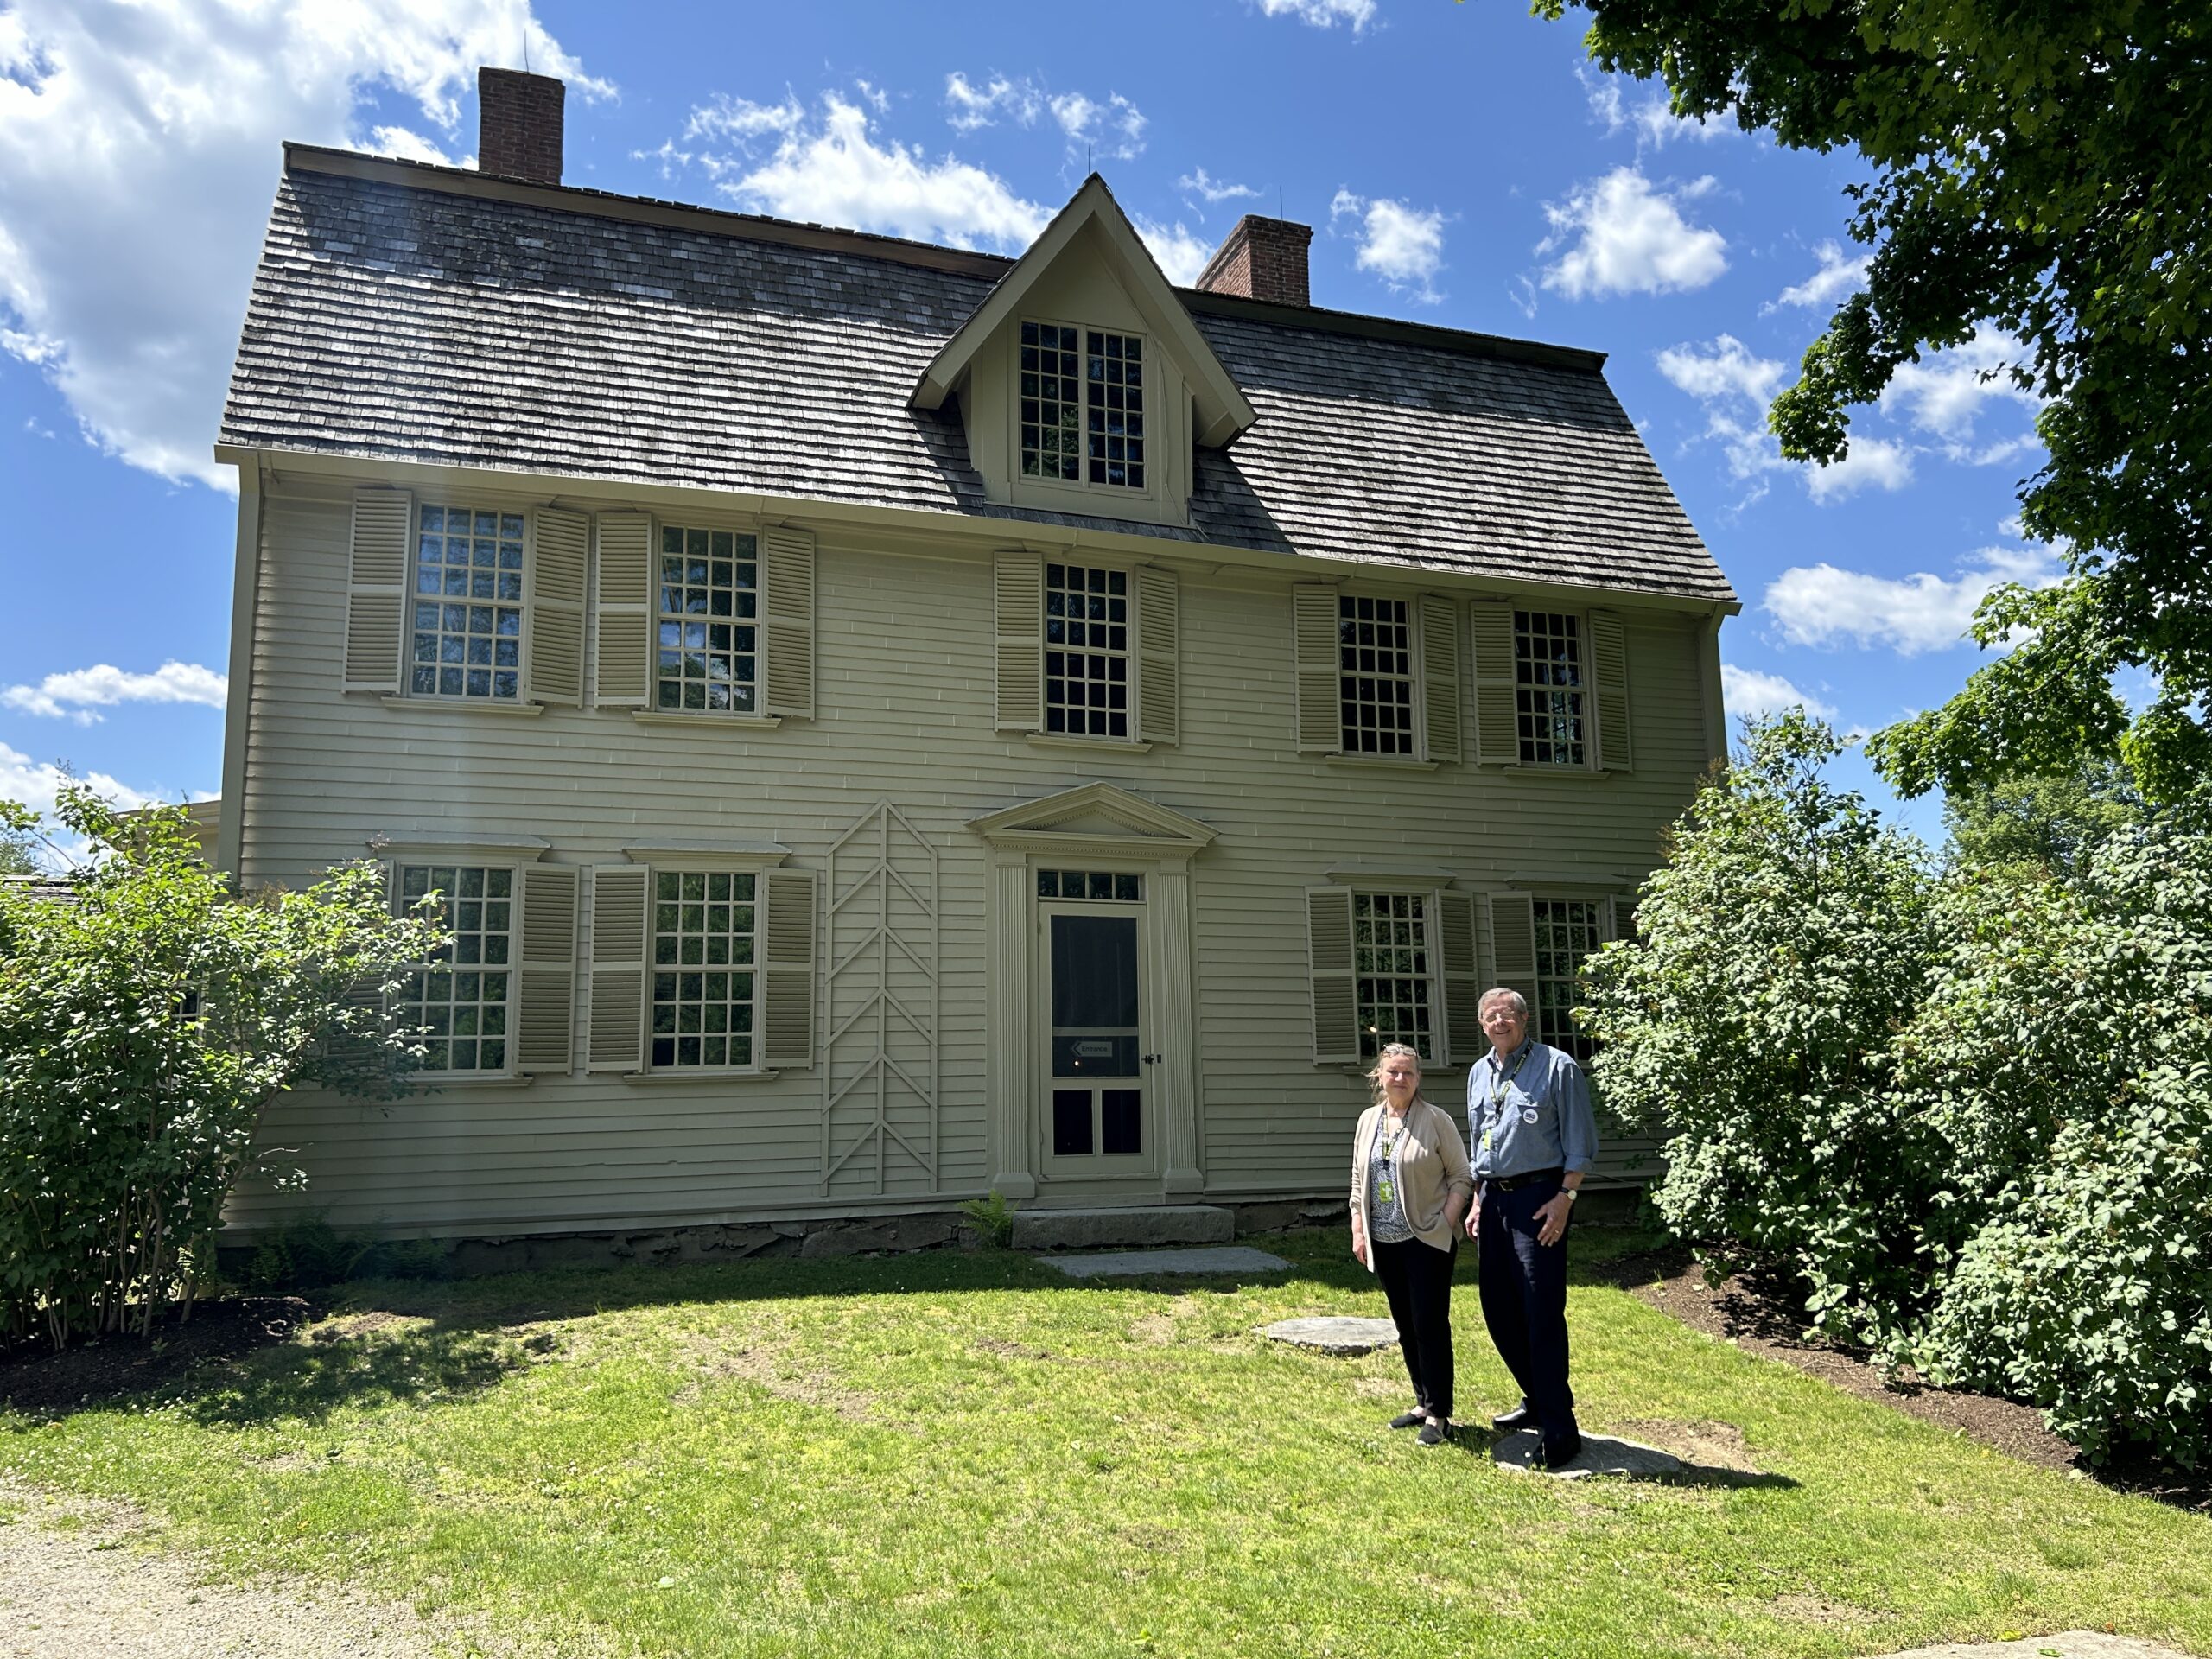 Marybeth Kelly, Trustees Lead Historic Interpreter, and Victor Curran, Interpreter, at The Old Manse.